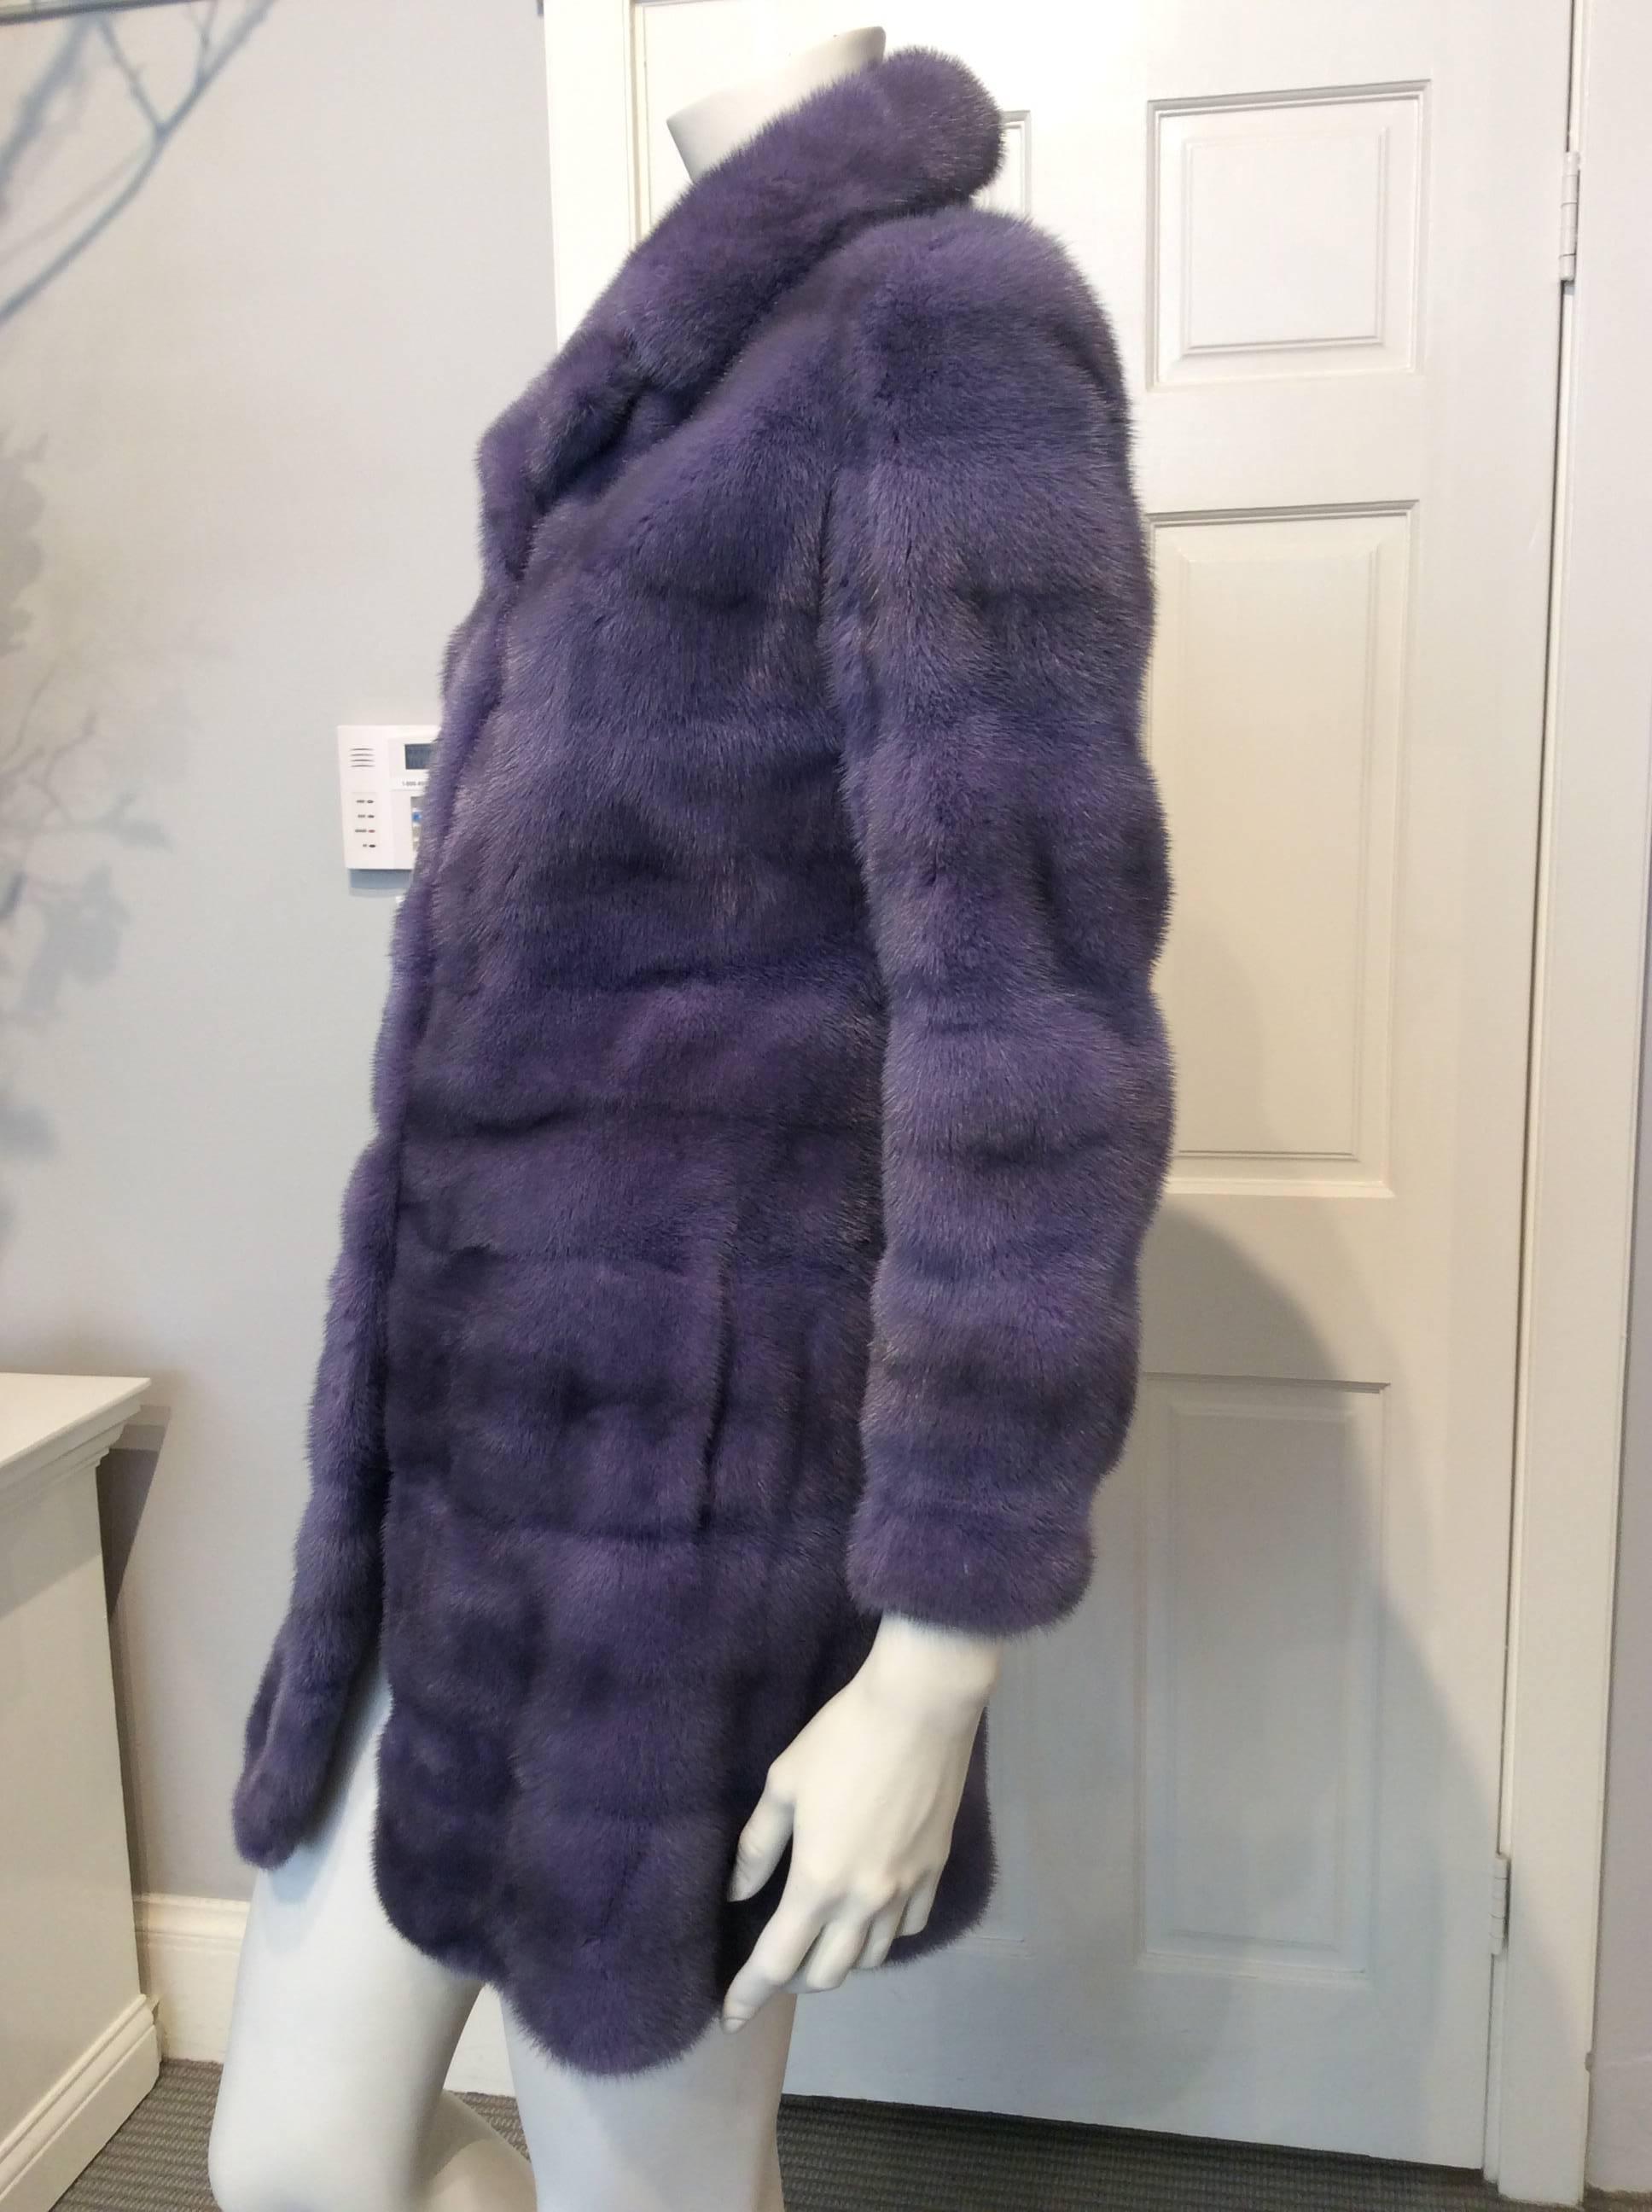 Show stopping Christian Dior 3/4 length mink coat in muted purple with dark grey shading By Saga Furs. It closes with three rectangular clasps are light gold brushed metal. It has two hidden front pockets. The lining is a very deep purple silk